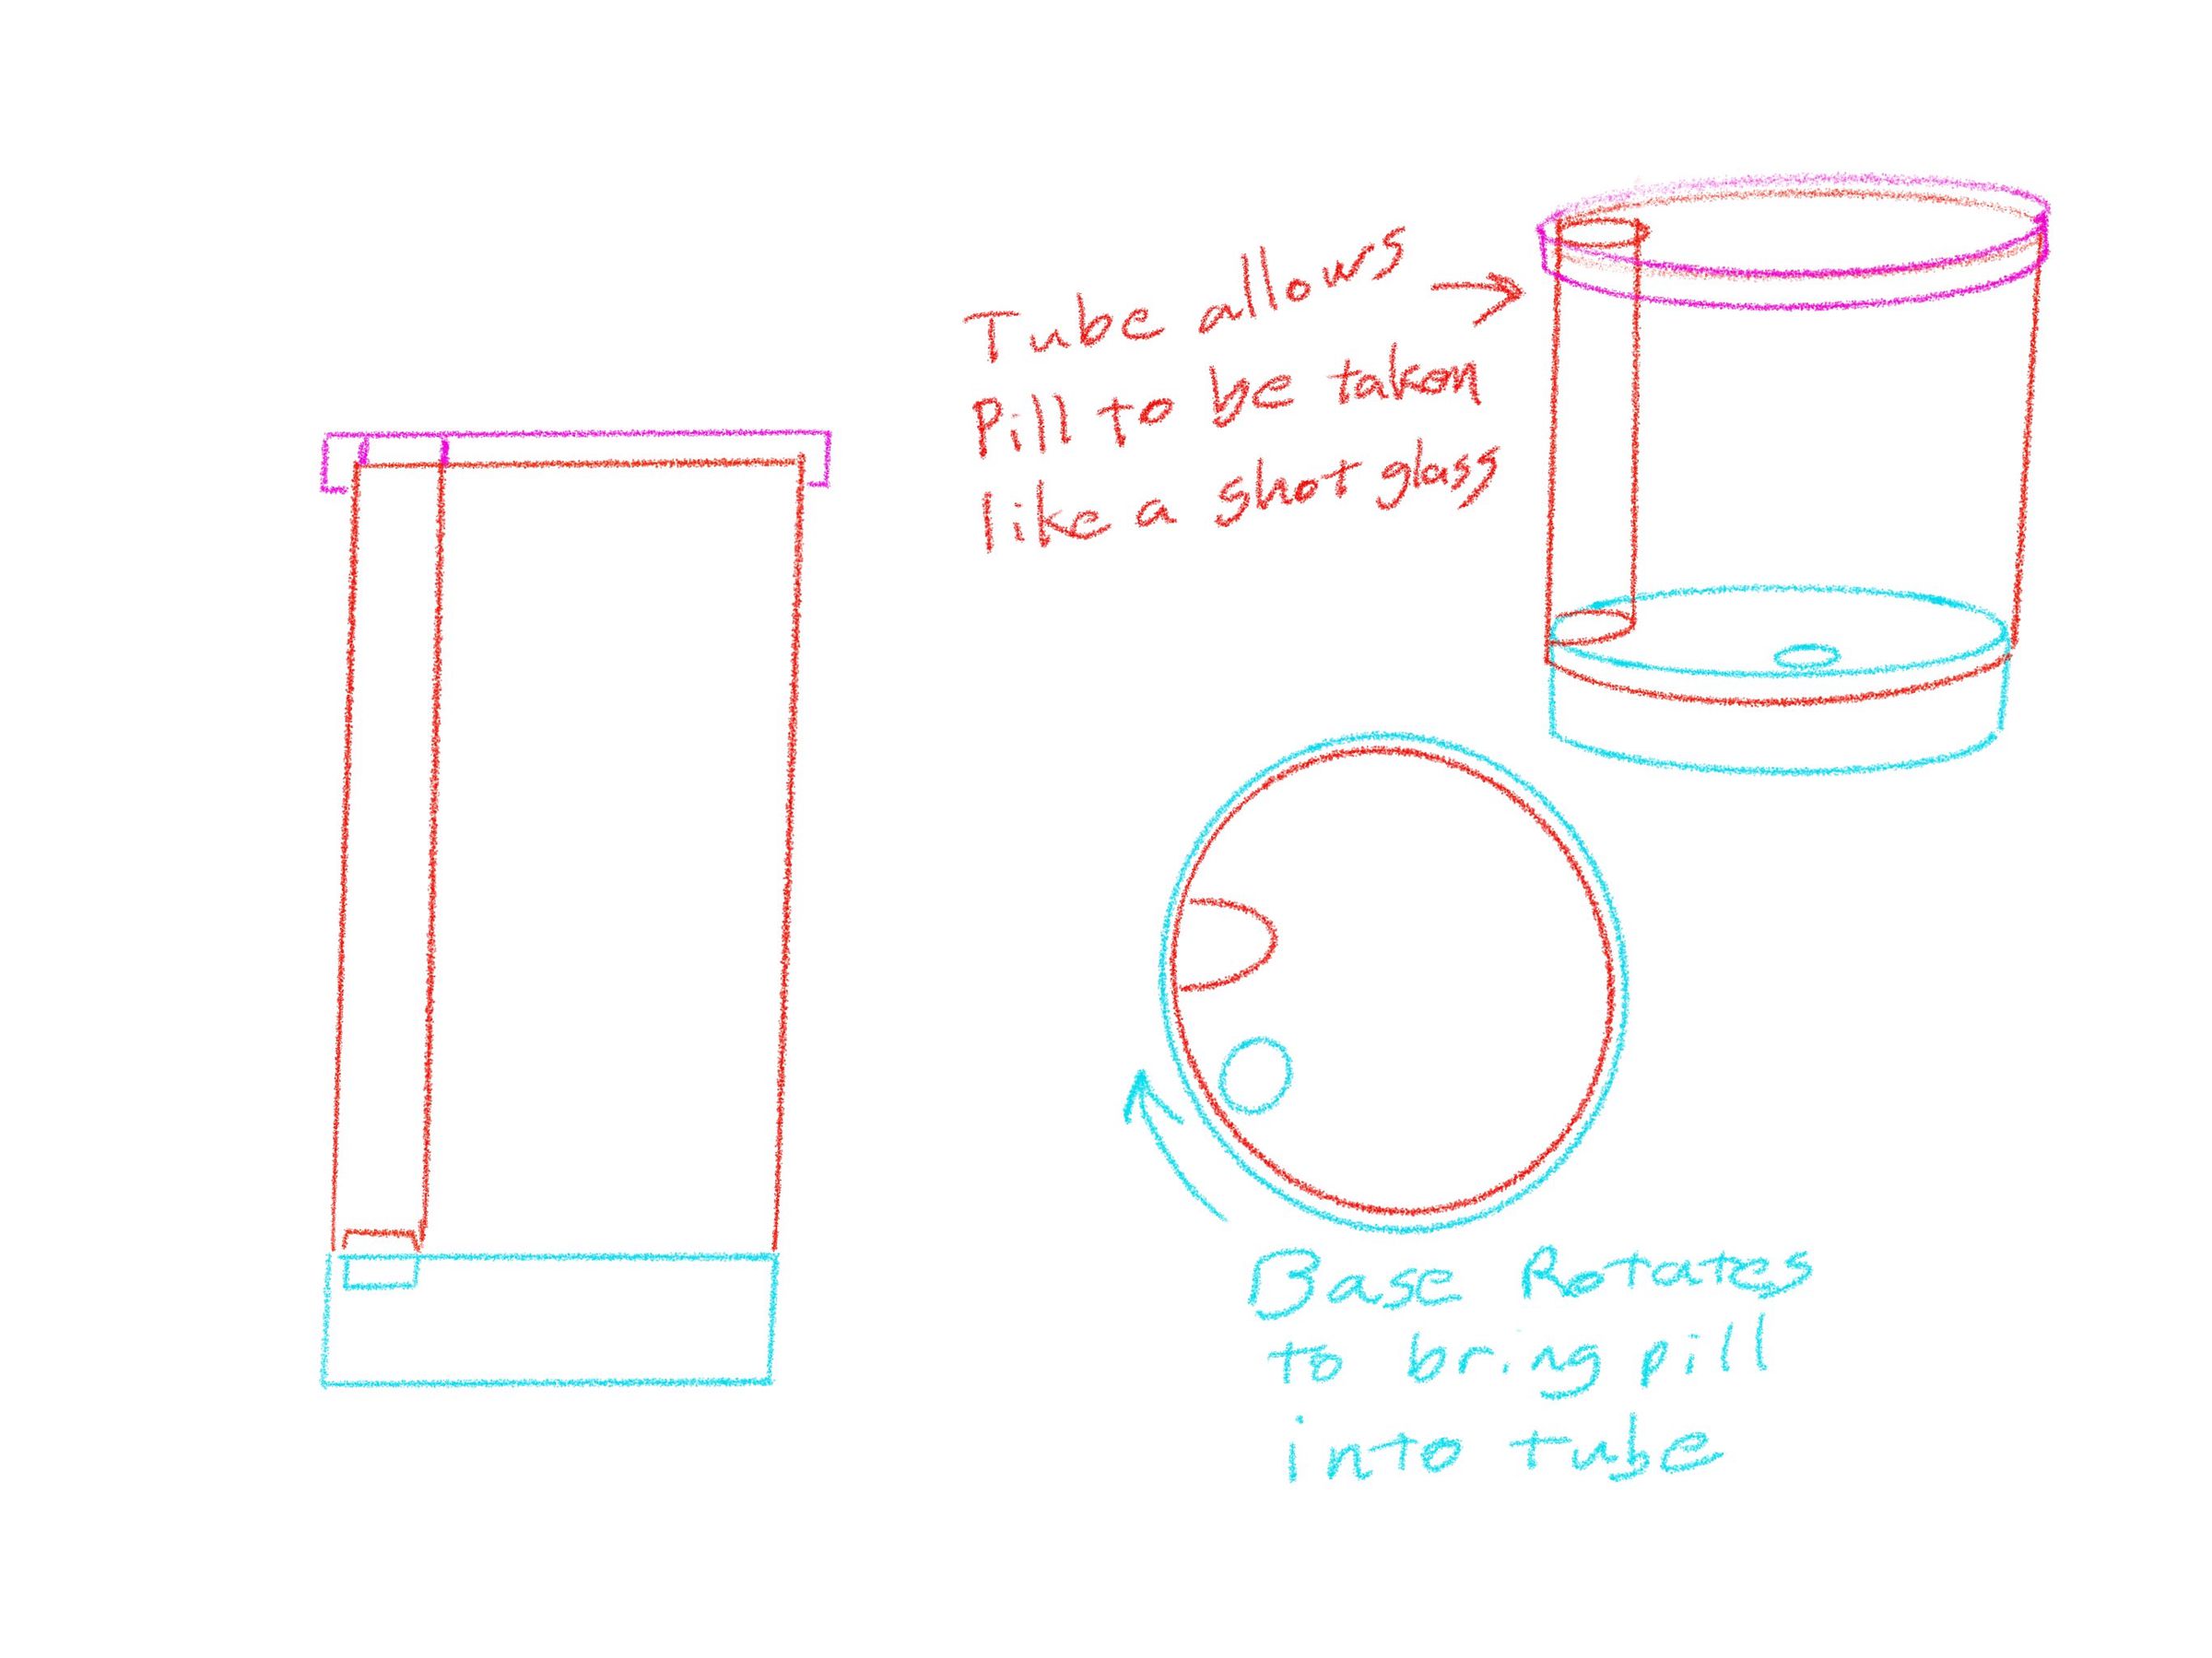 Simple line drawings of the bottle prototype, with lines for the cap in pink, the body in red, and the base in blue. There are two side views and one from the top. Writing reads “Tube allows pill to be taken like a shot glass” with an arrow toward a pill inside the bottle. More writing reads “Base rotates to bring pill into tube” with an arrow to indicate rotation.